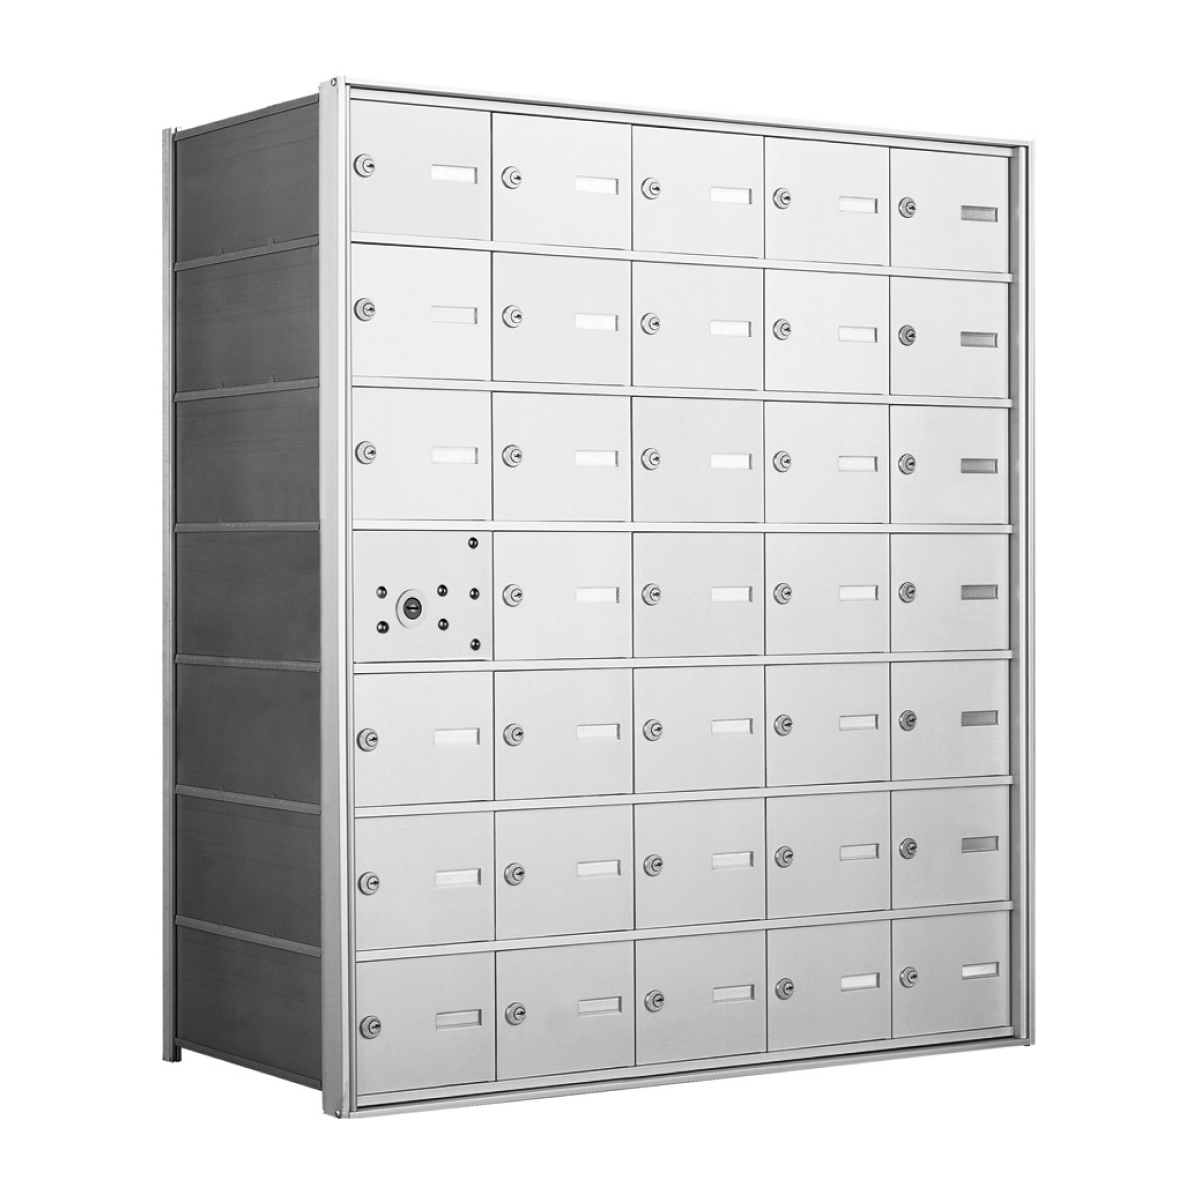 1400 Series Front-Loading Horizontal Mailboxes in Anodized Aluminum Finish – 34 Tenant Doors And 1 USPS Master Door Product Image